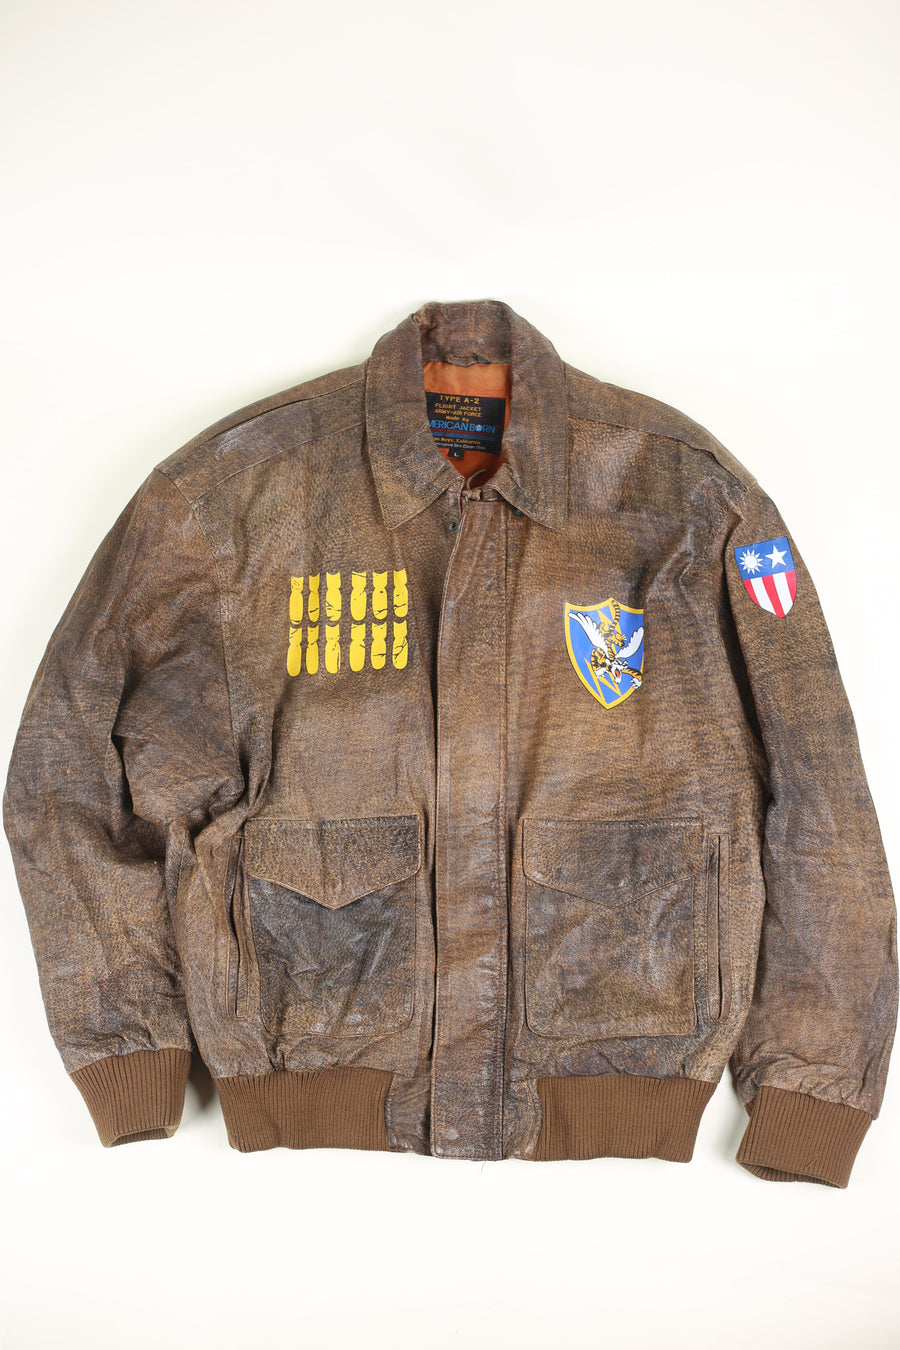 A2 Flying Tigers Leather Jacket -L -